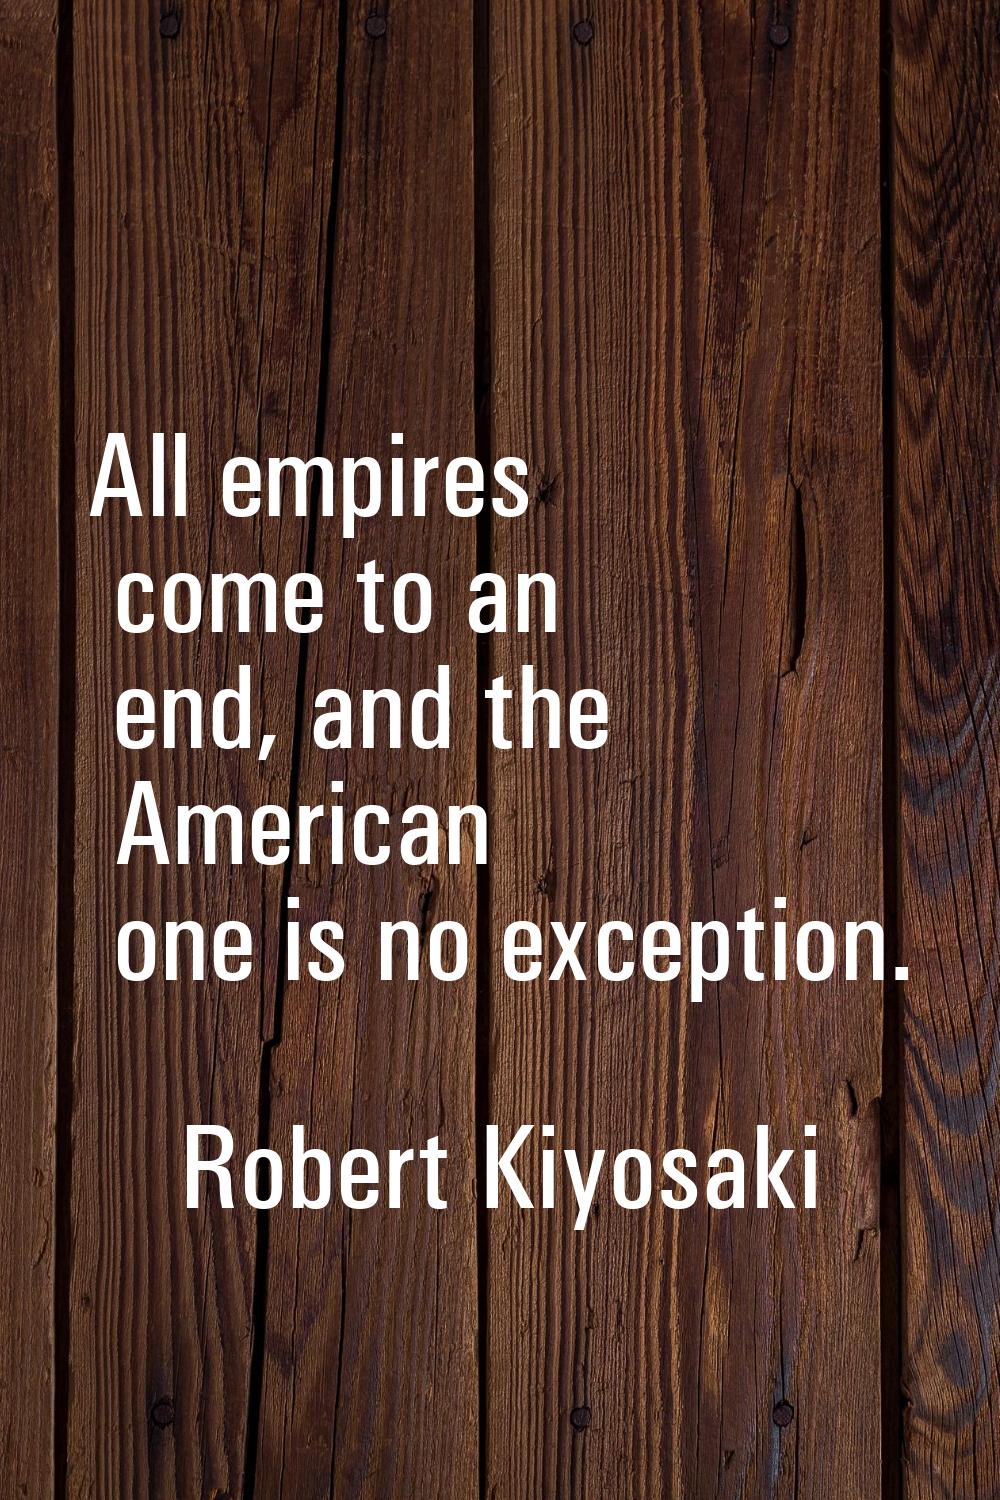 All empires come to an end, and the American one is no exception.